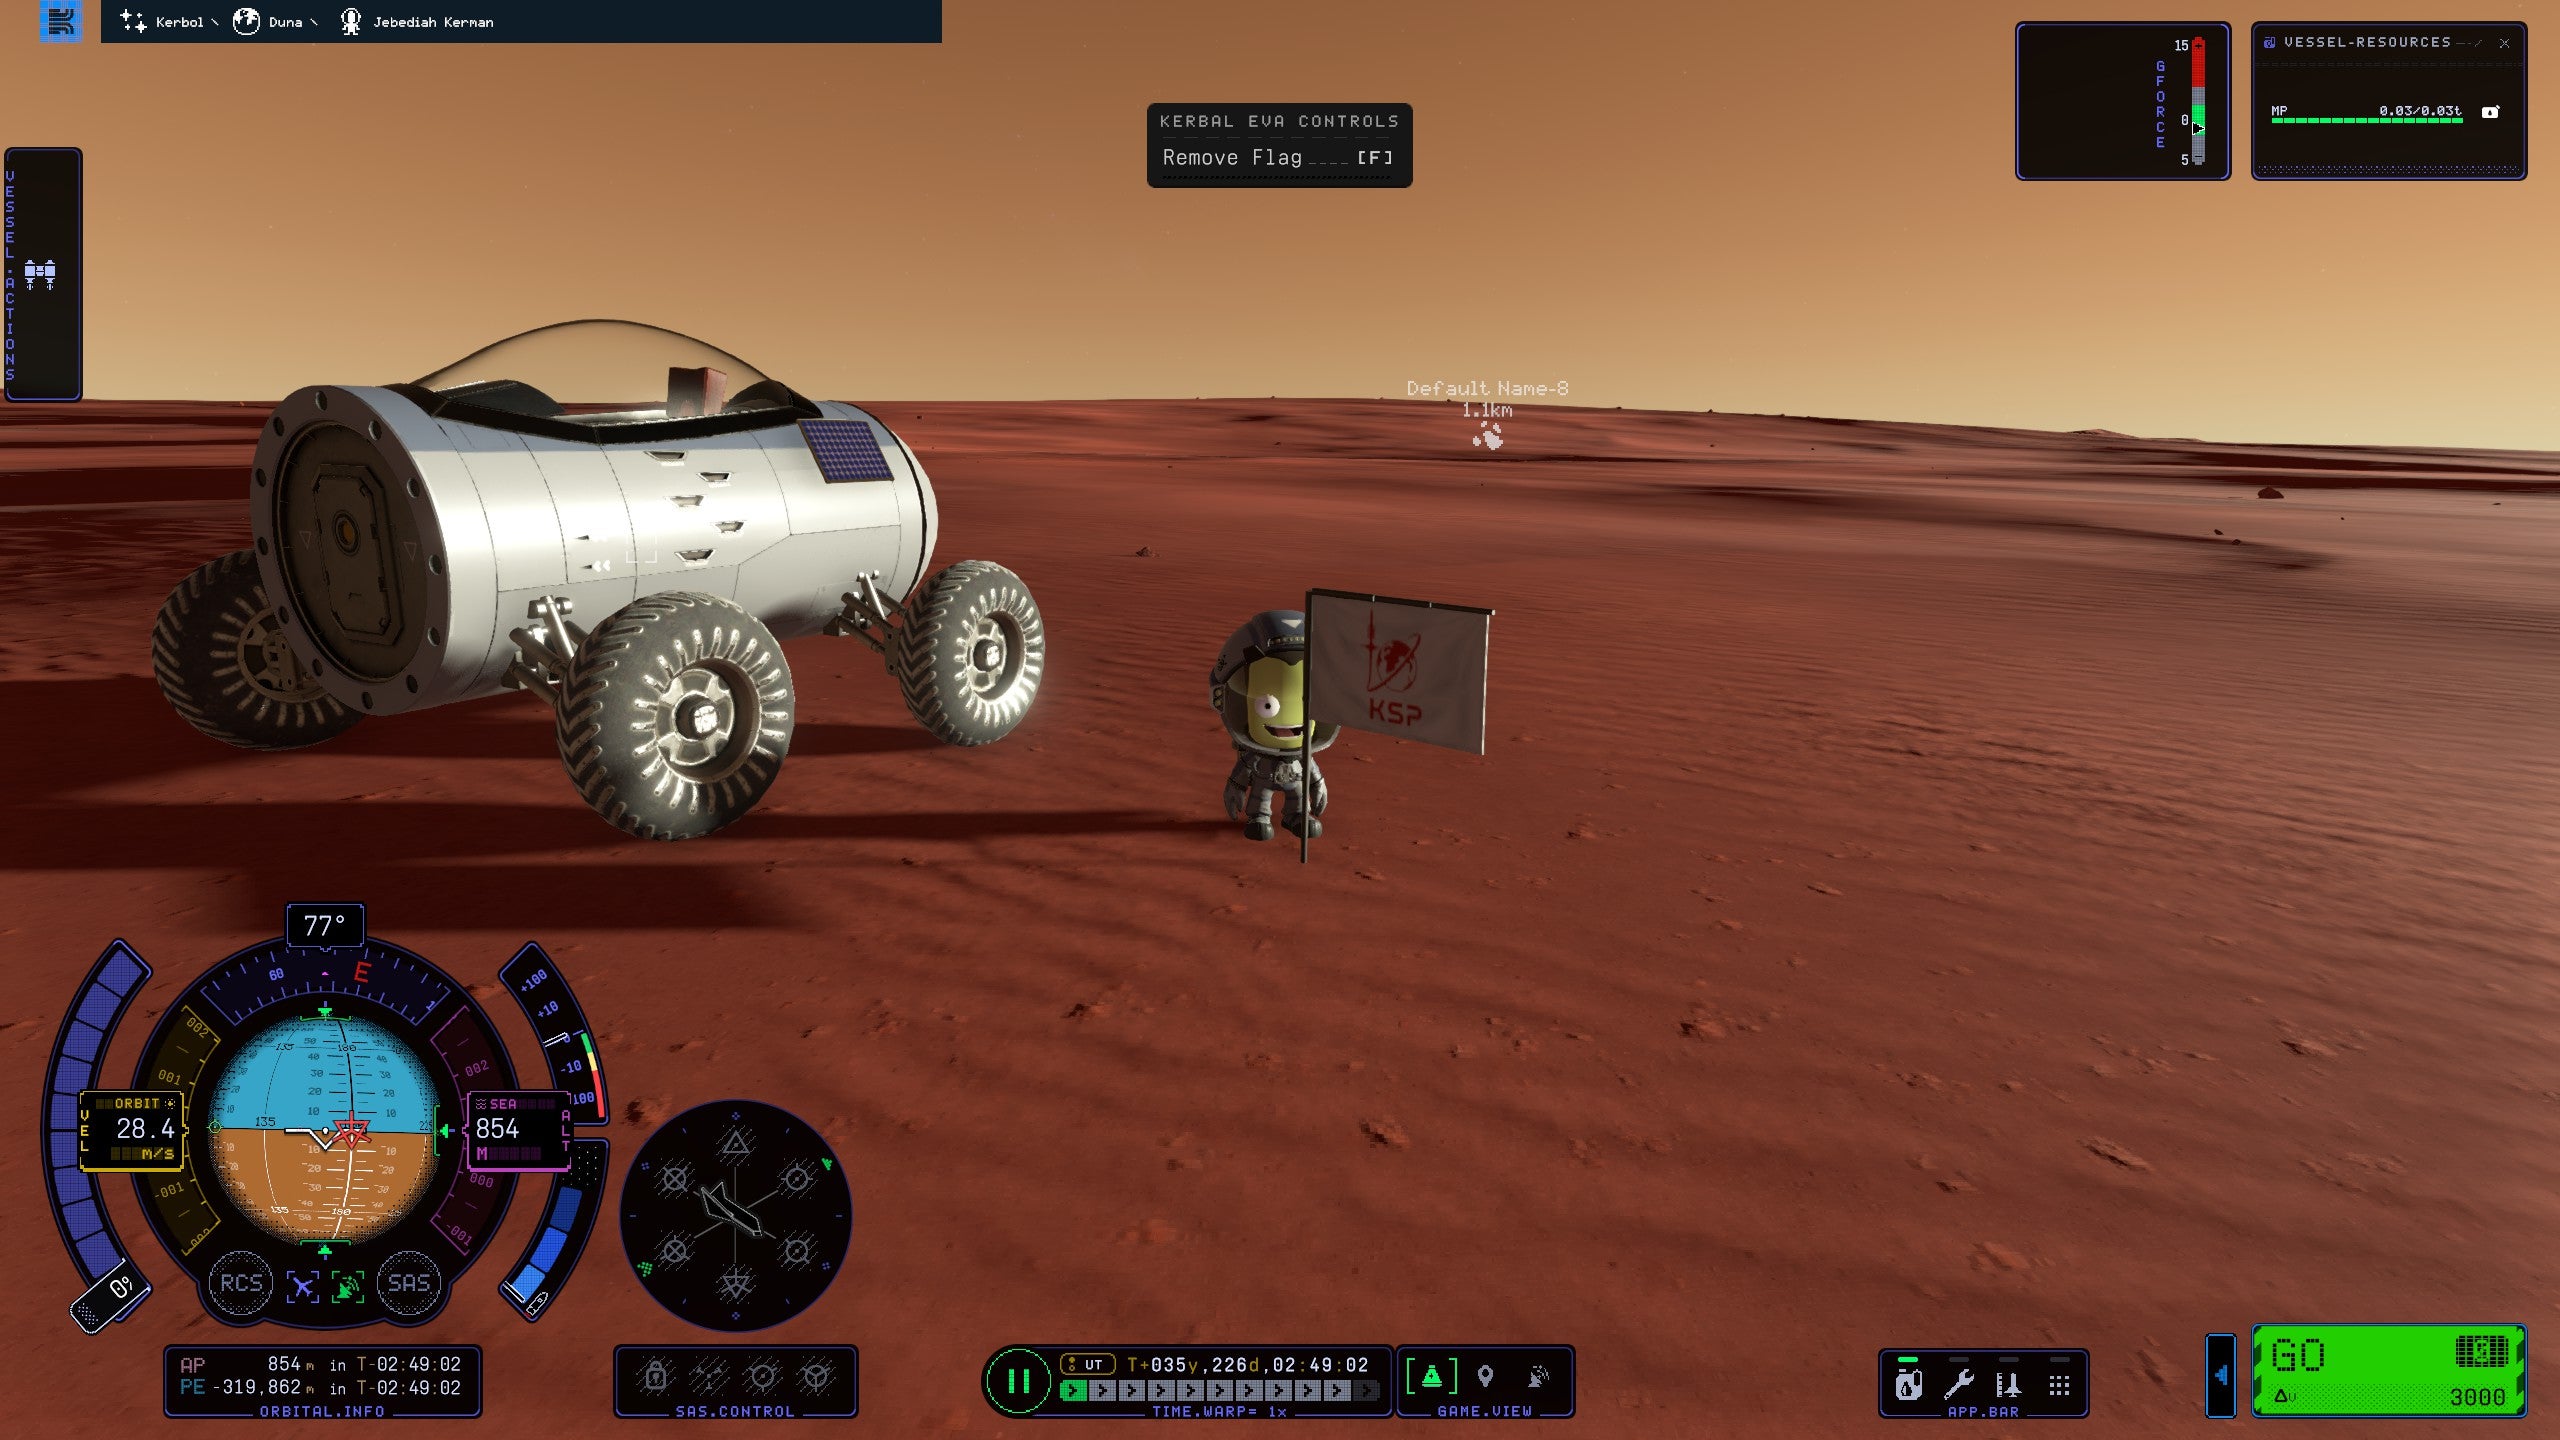 Kerbal from Kerbal Space Program 2 stands on a red sand planet next to a planted KSP flag